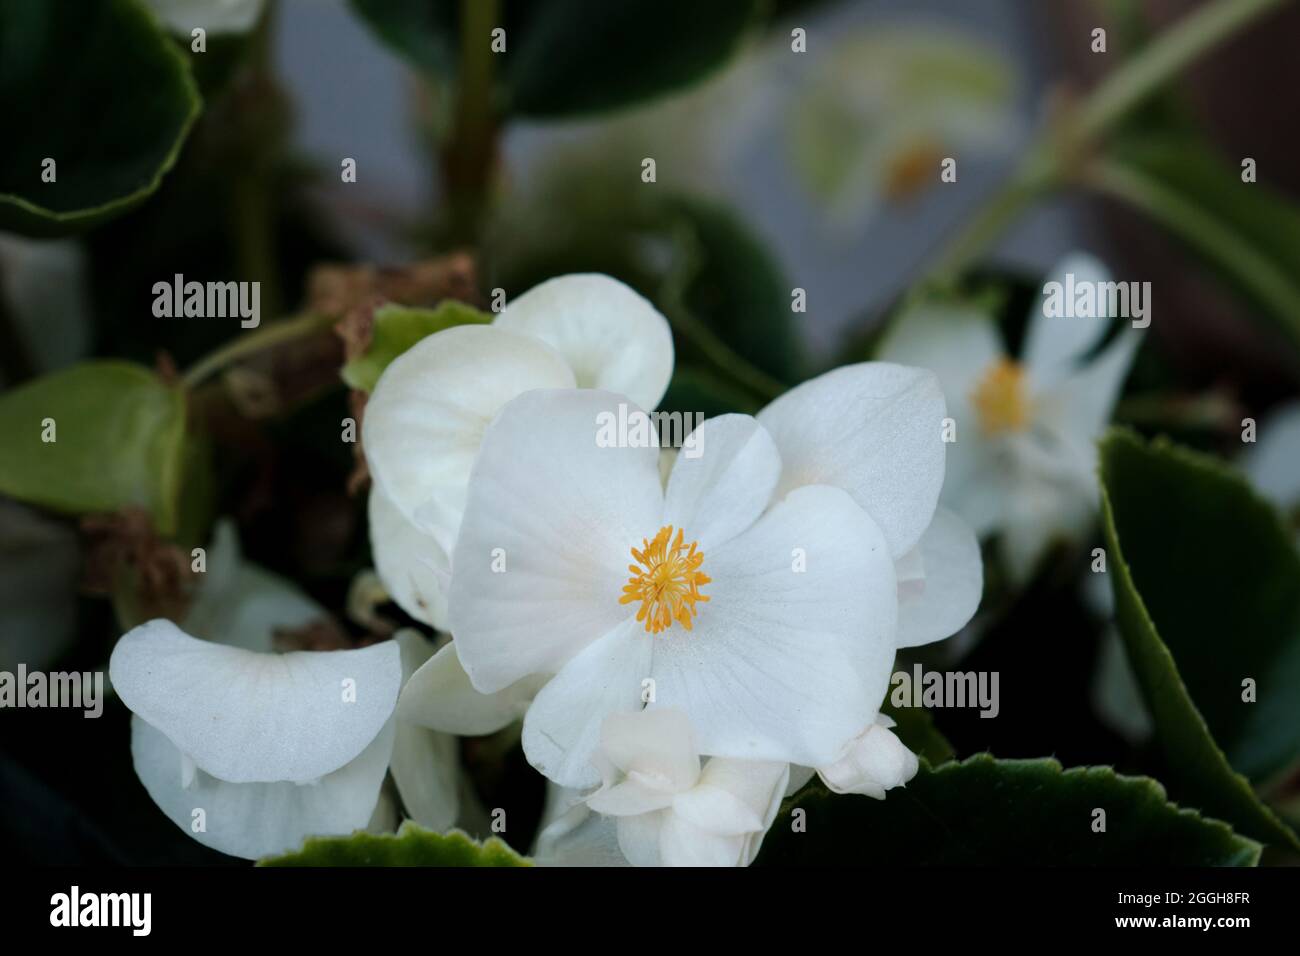 Begonia cucullata known as wax begonia white blooming flowers Stock Photo